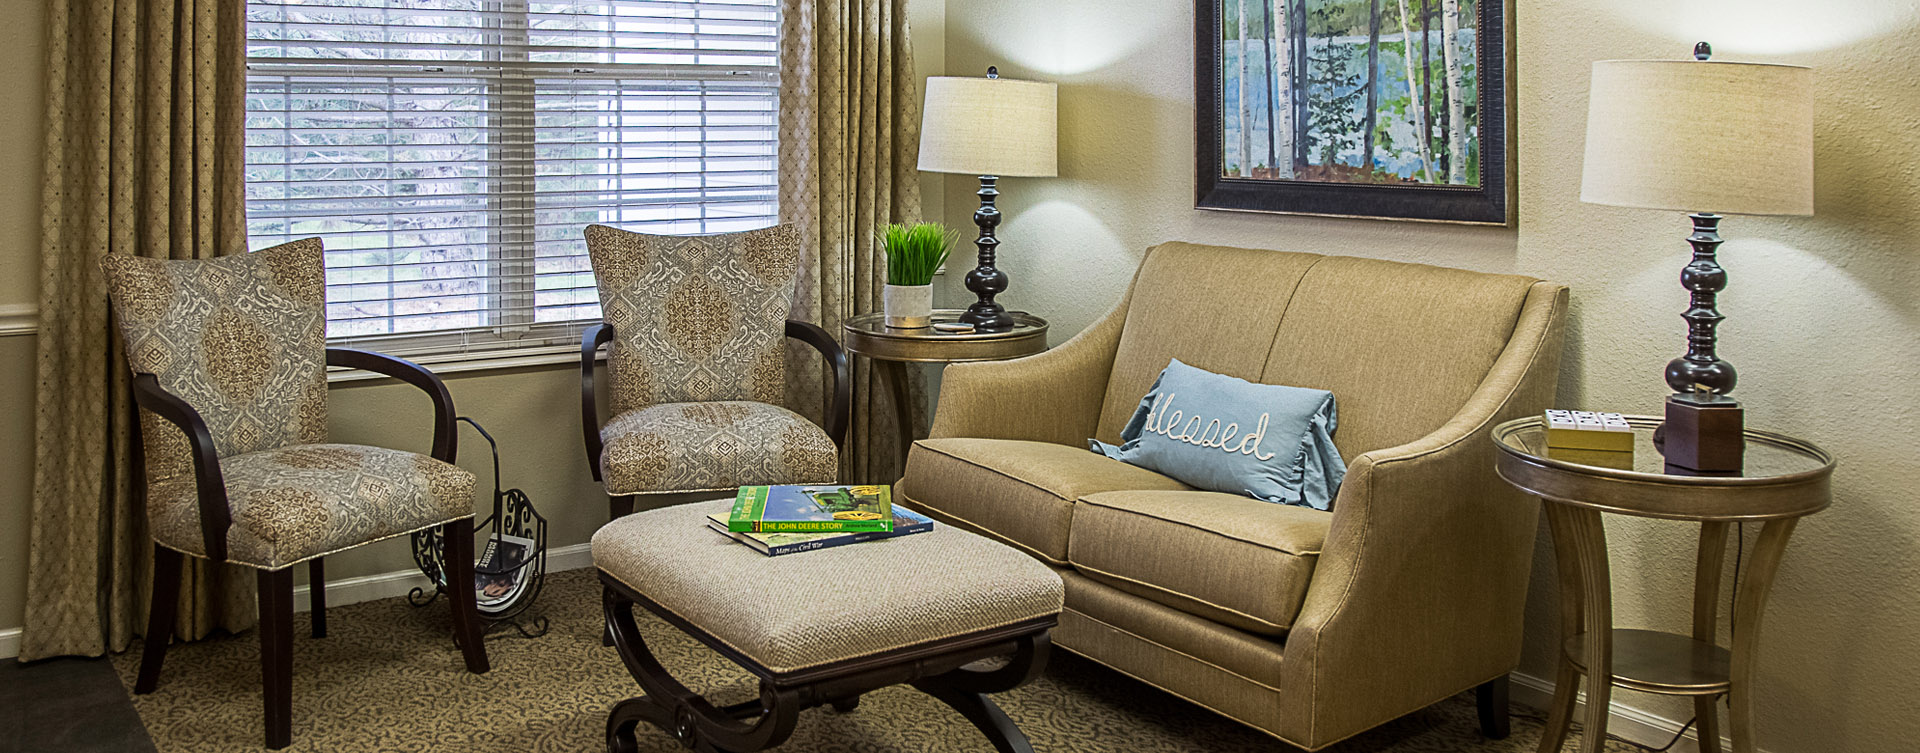 Enjoy a good snooze in the sitting area at Bickford of Davenport